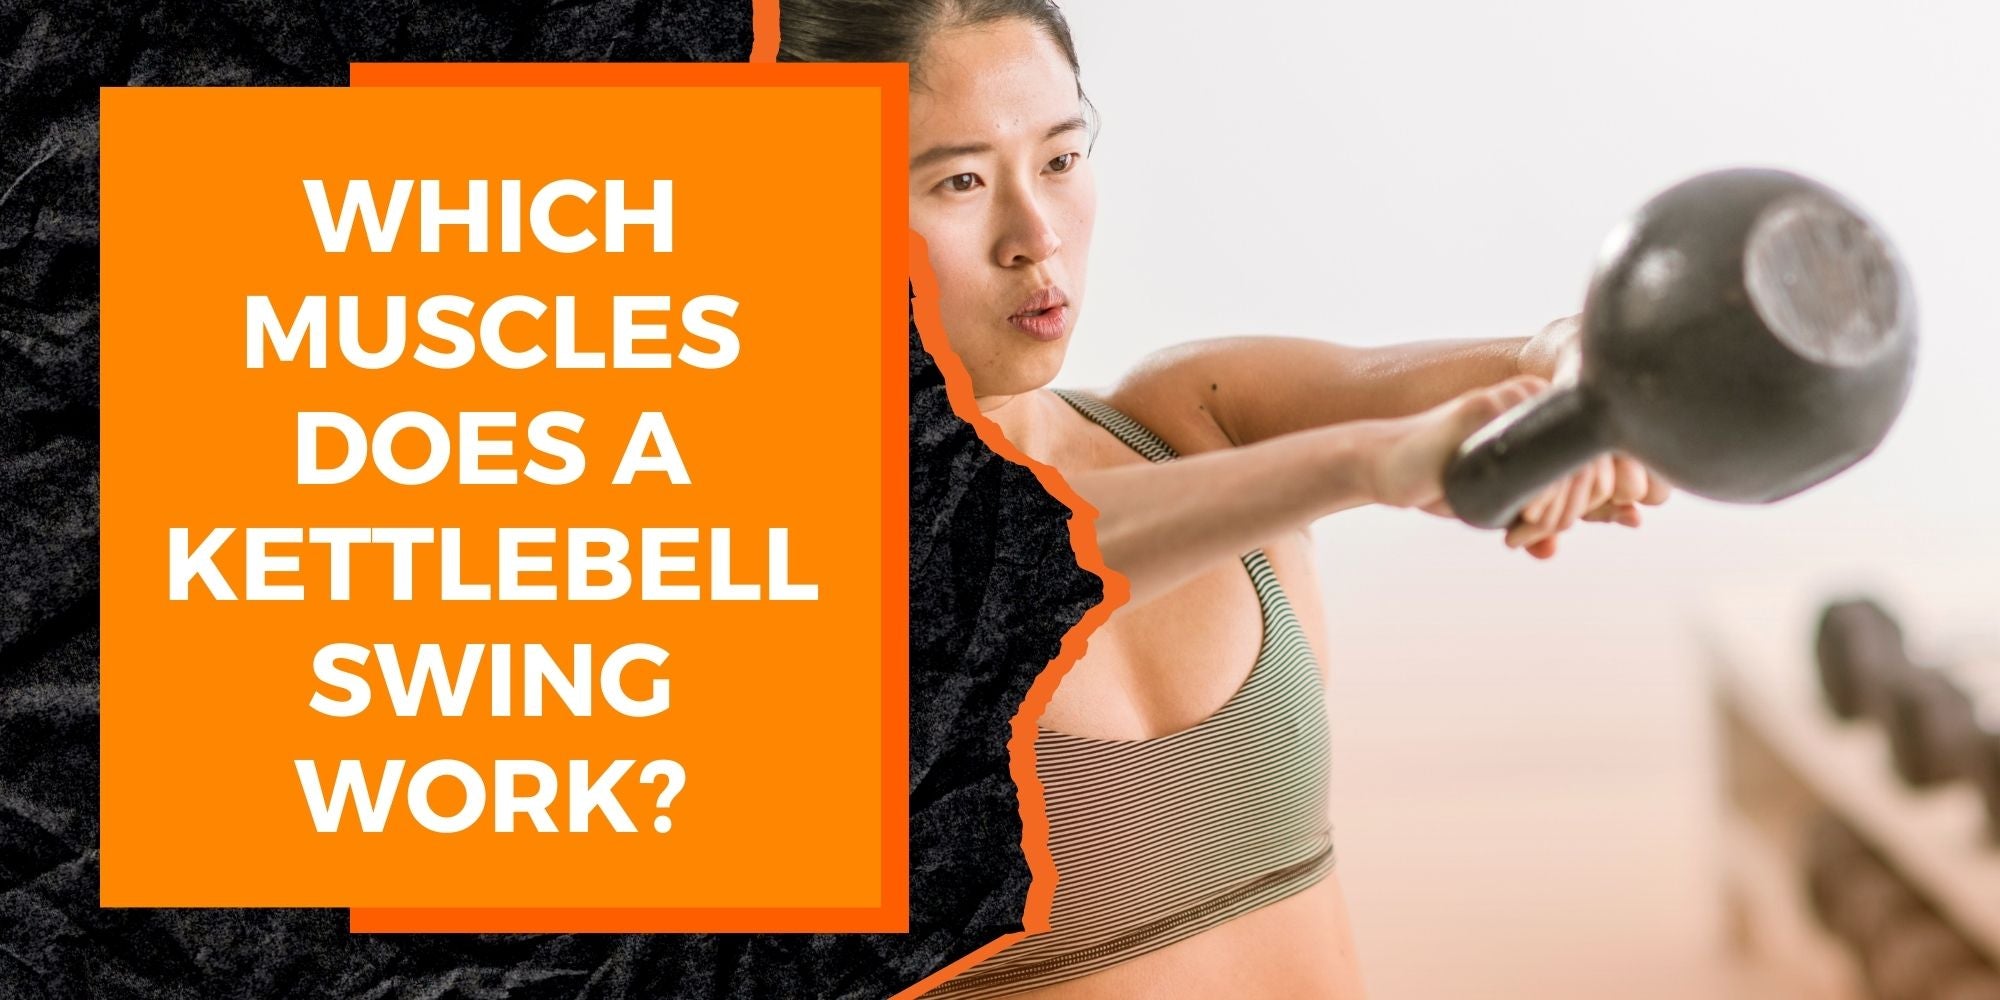 Which Muscles Does A Kettlebell Swing Work?